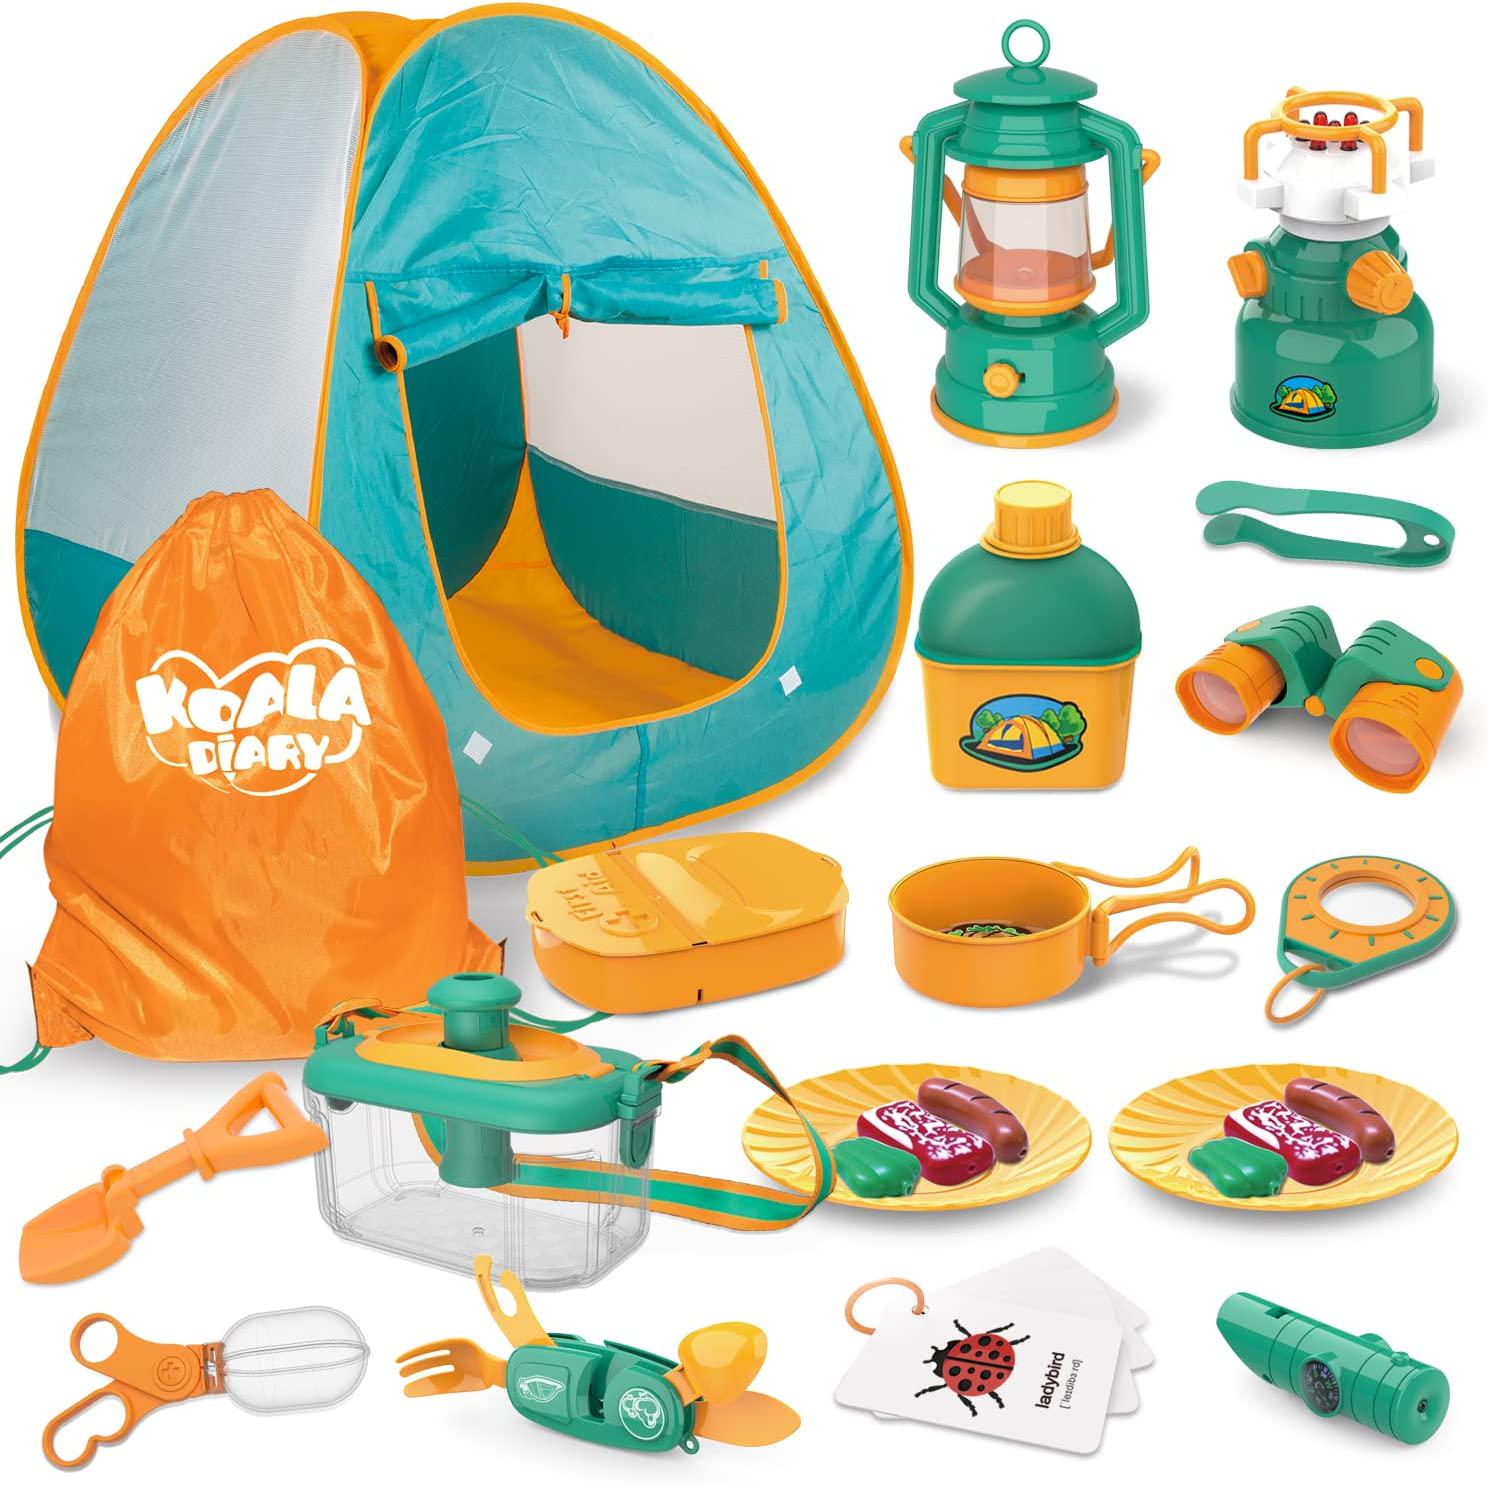 KOALA DIARY, KOALA DIARY Kids Play Tent, Camping Tent Set, Camping Gear Tool Pretend Play Set, Bug Catcher for Kids, with Outdoor Explorer Bug Catcher Kit Toy Gift